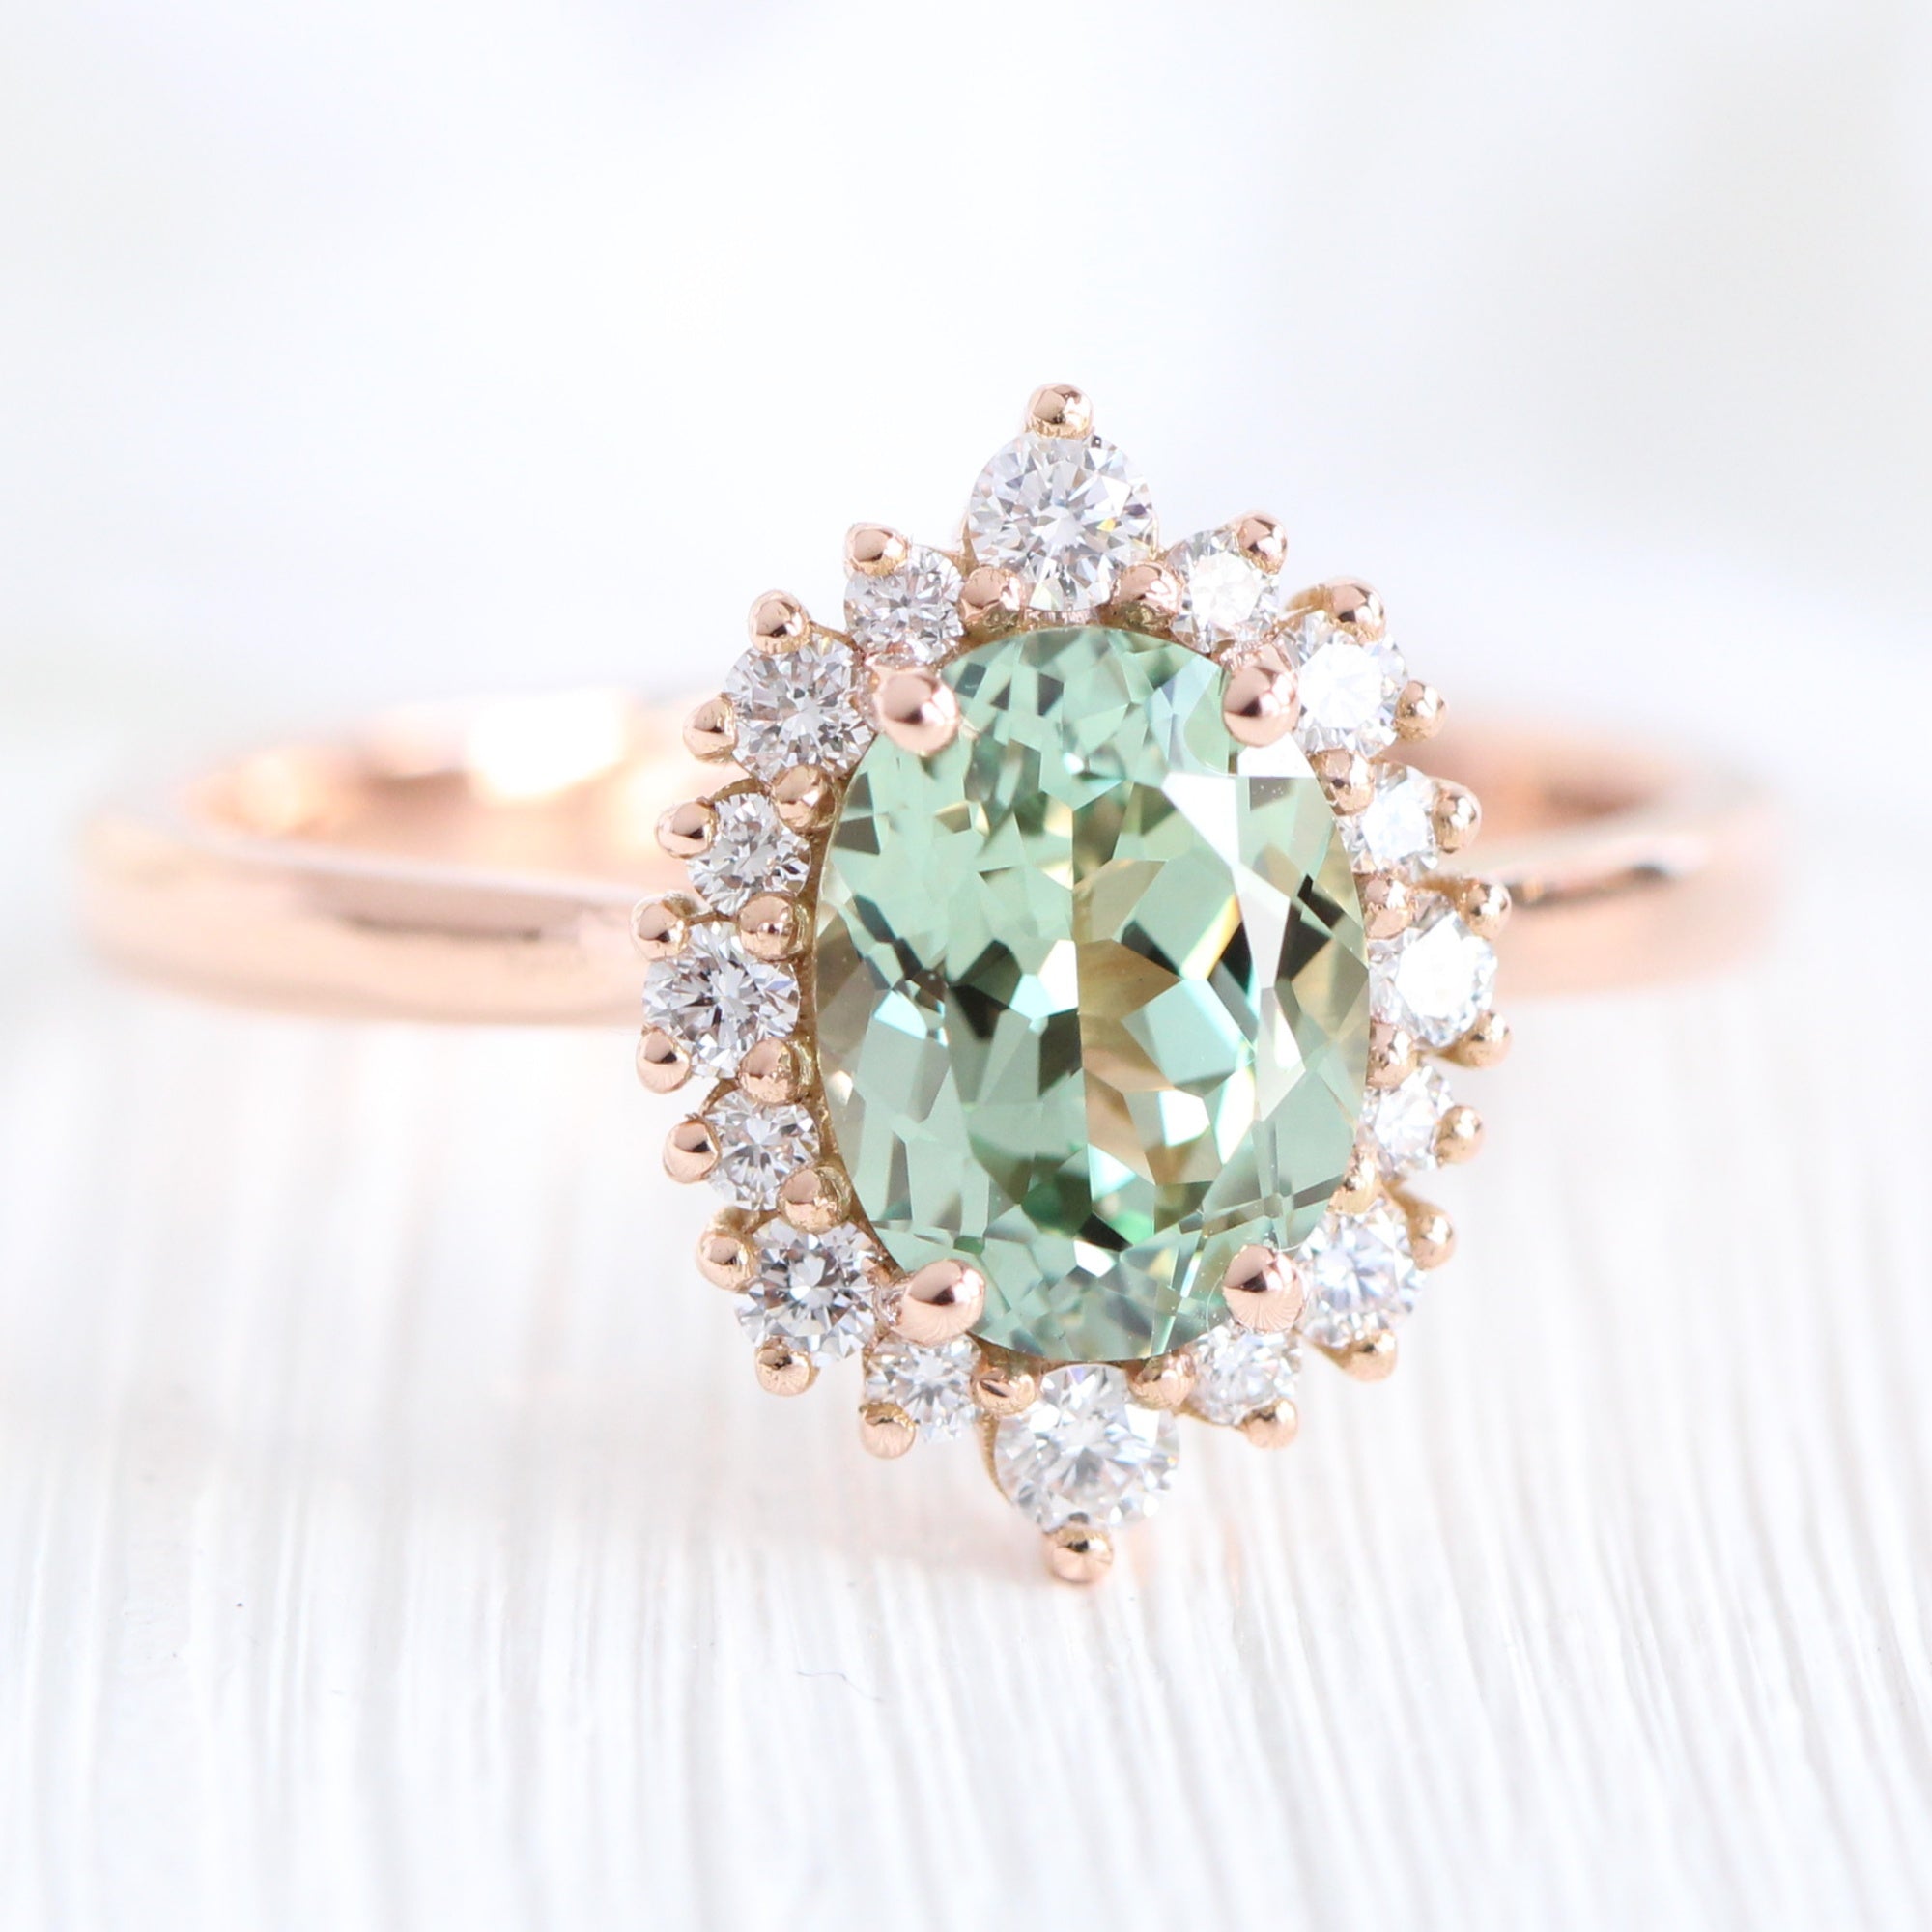 Oval green sapphire ring rose gold halo diamond ring la more design jewelryOval green sapphire ring rose gold halo diamond ring la more design jewelry